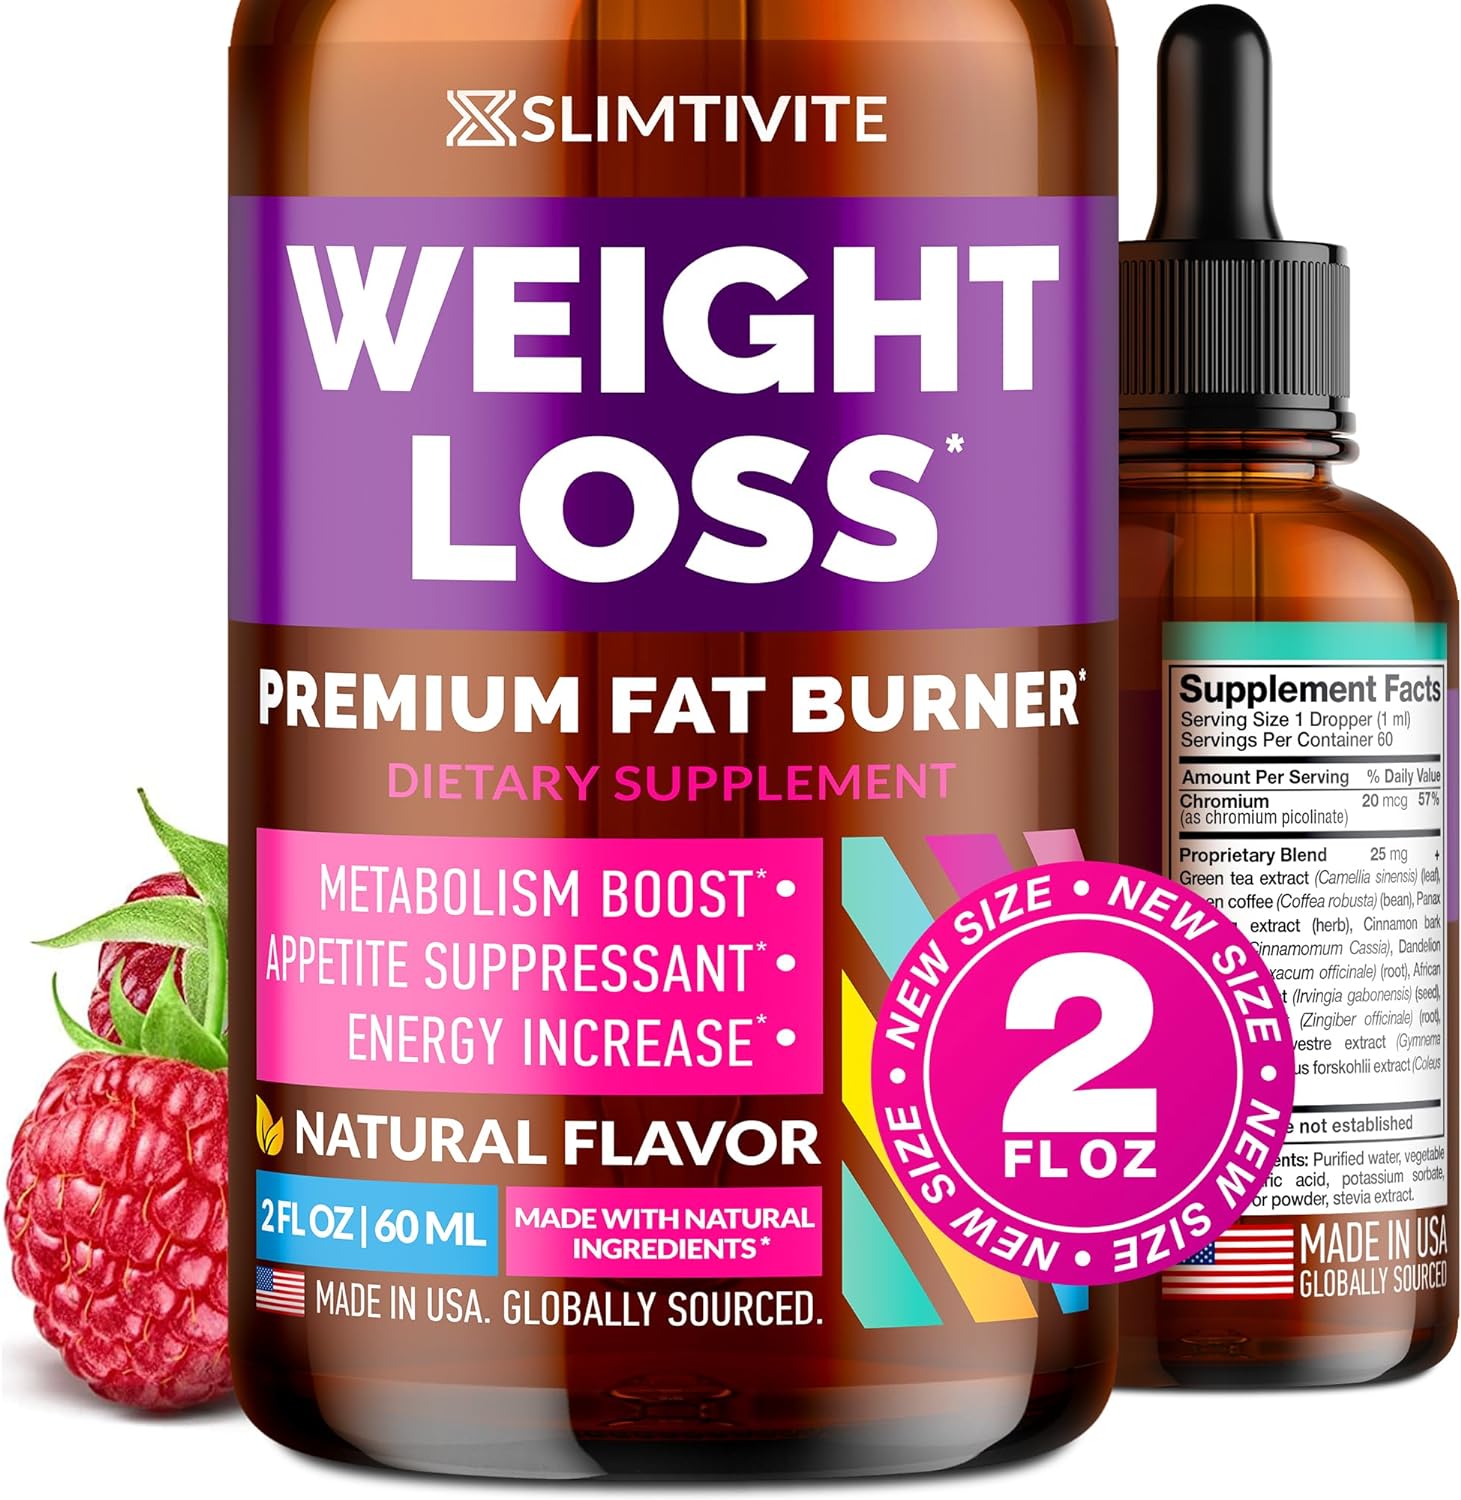 Slimtivite Weight Loss Drops - Diet Drops for Fat Loss - Effective Appetite Suppressant  Metabolism Booster - Safe  Proven Ingredients - Non-GMO Fat Burner